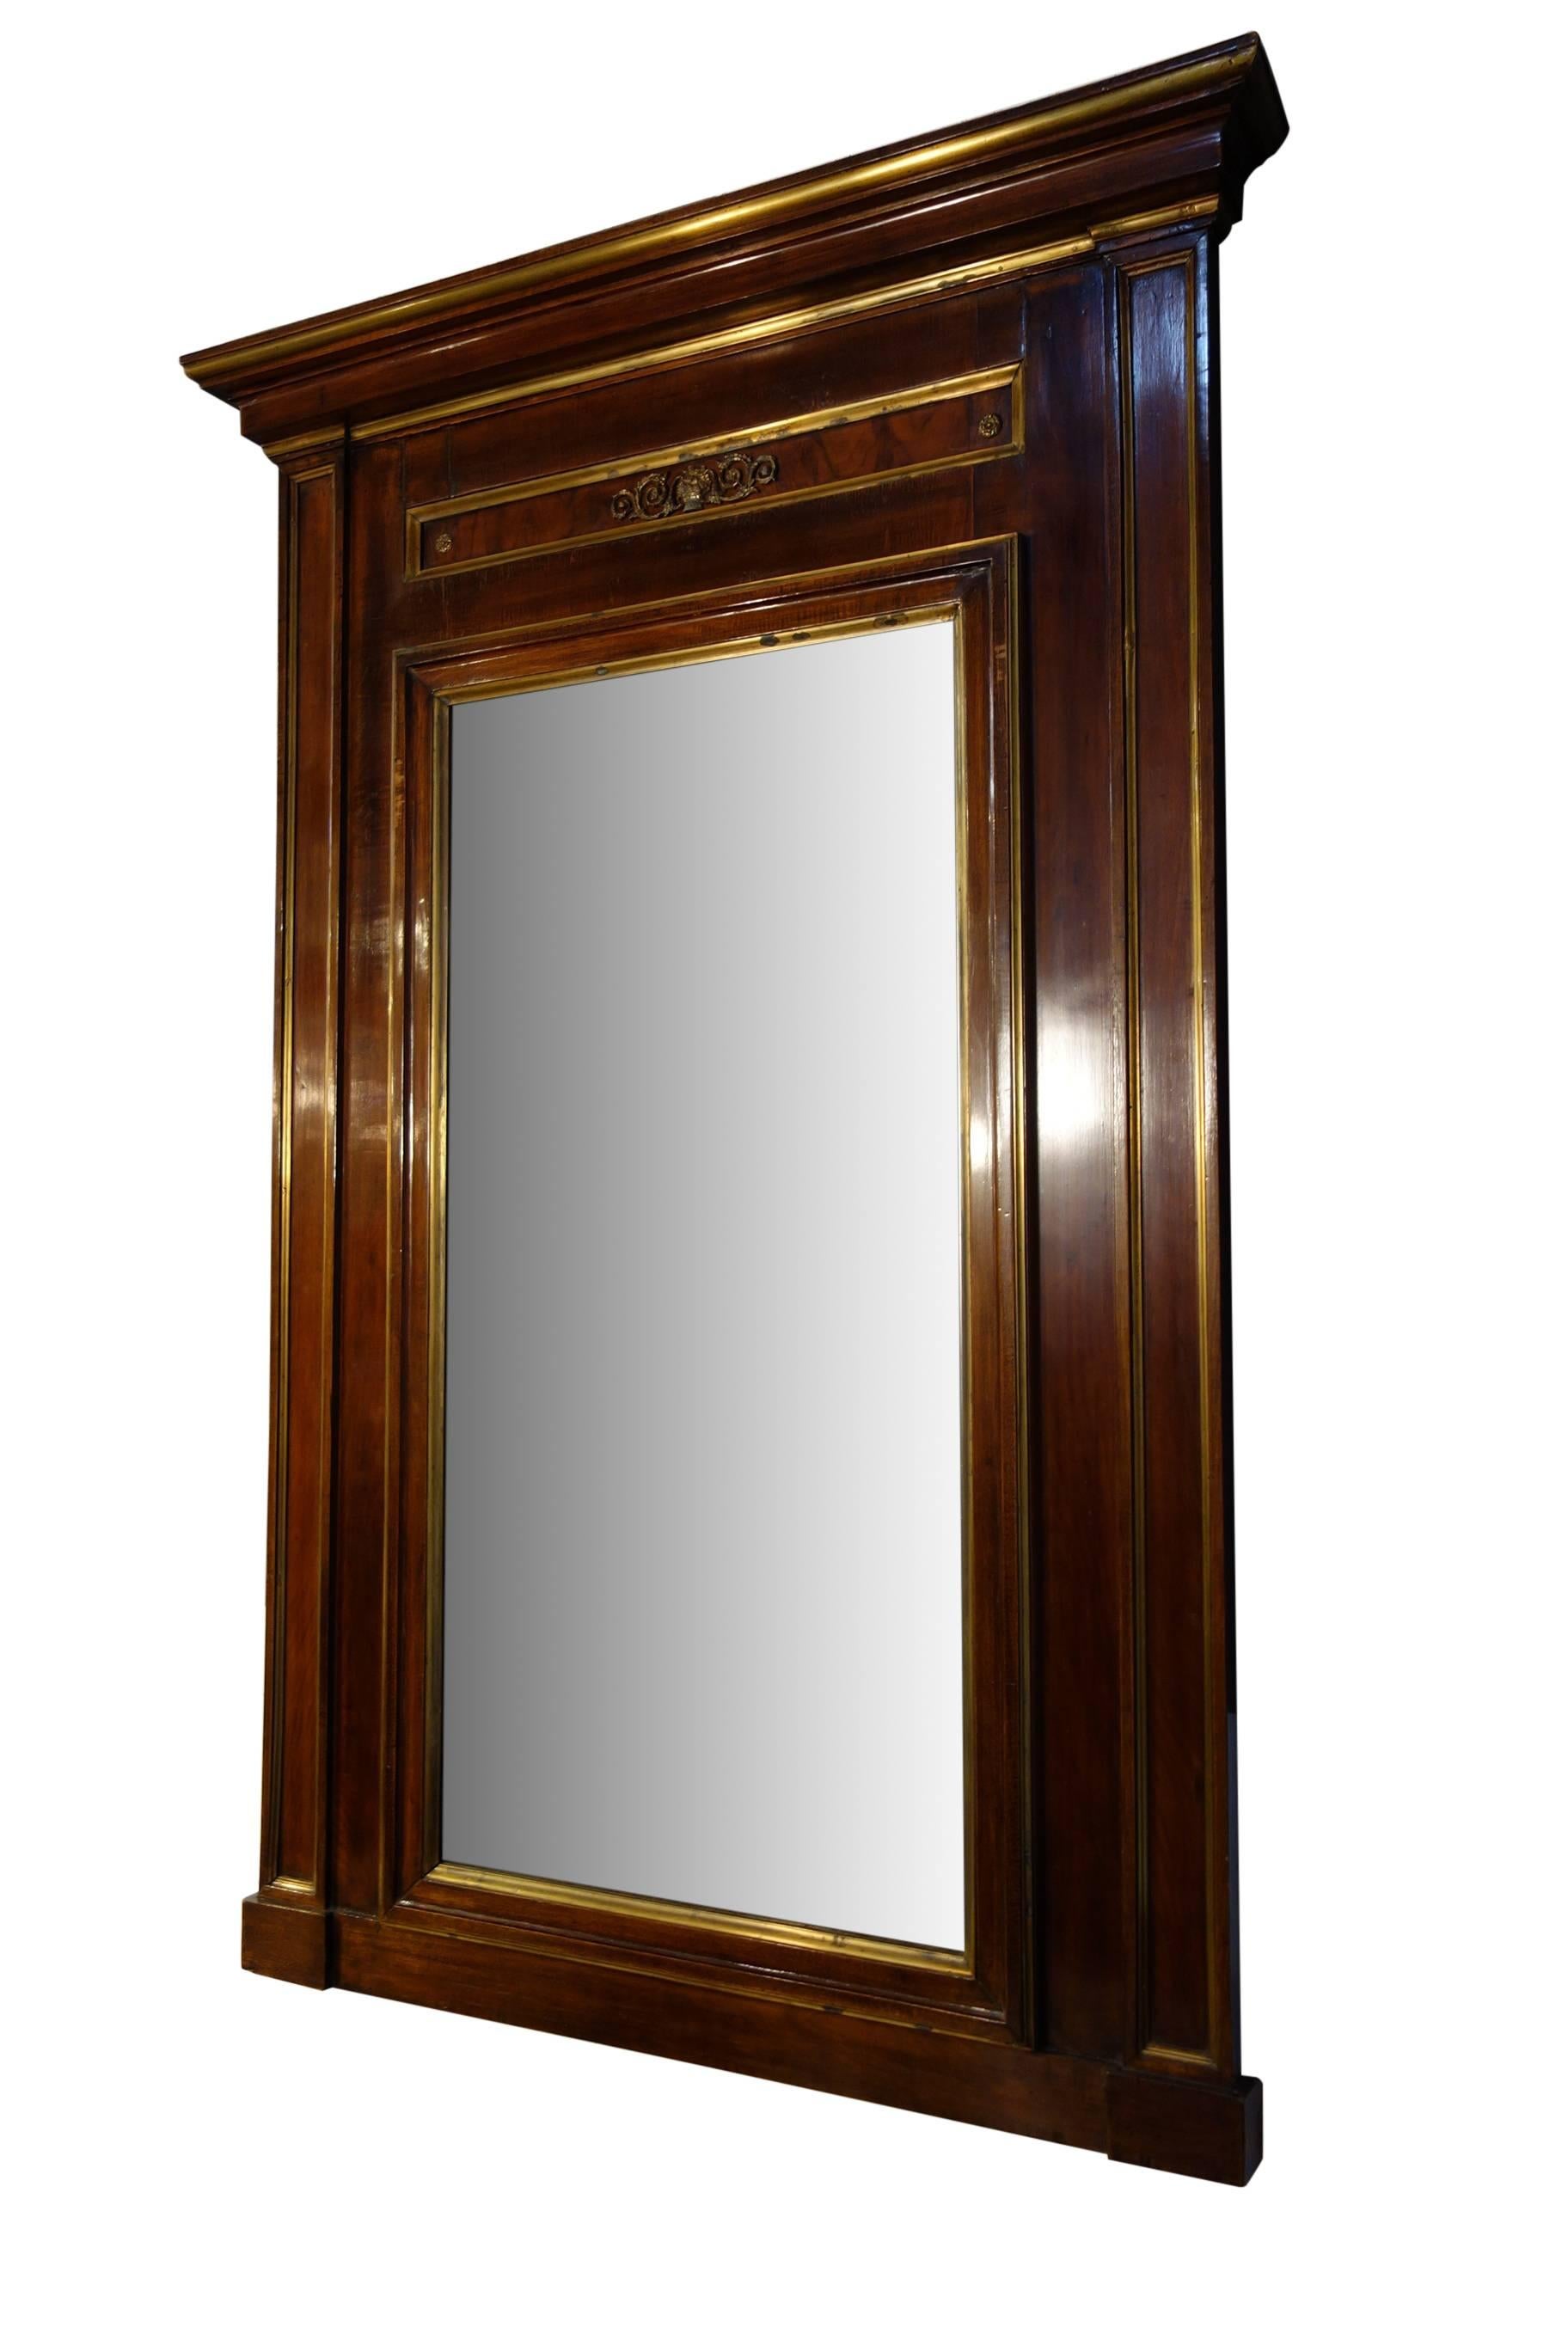 Hand-Crafted Early 19th Century Empire Framed Mirror Walnut with Gold Detail Circa 1820 For Sale